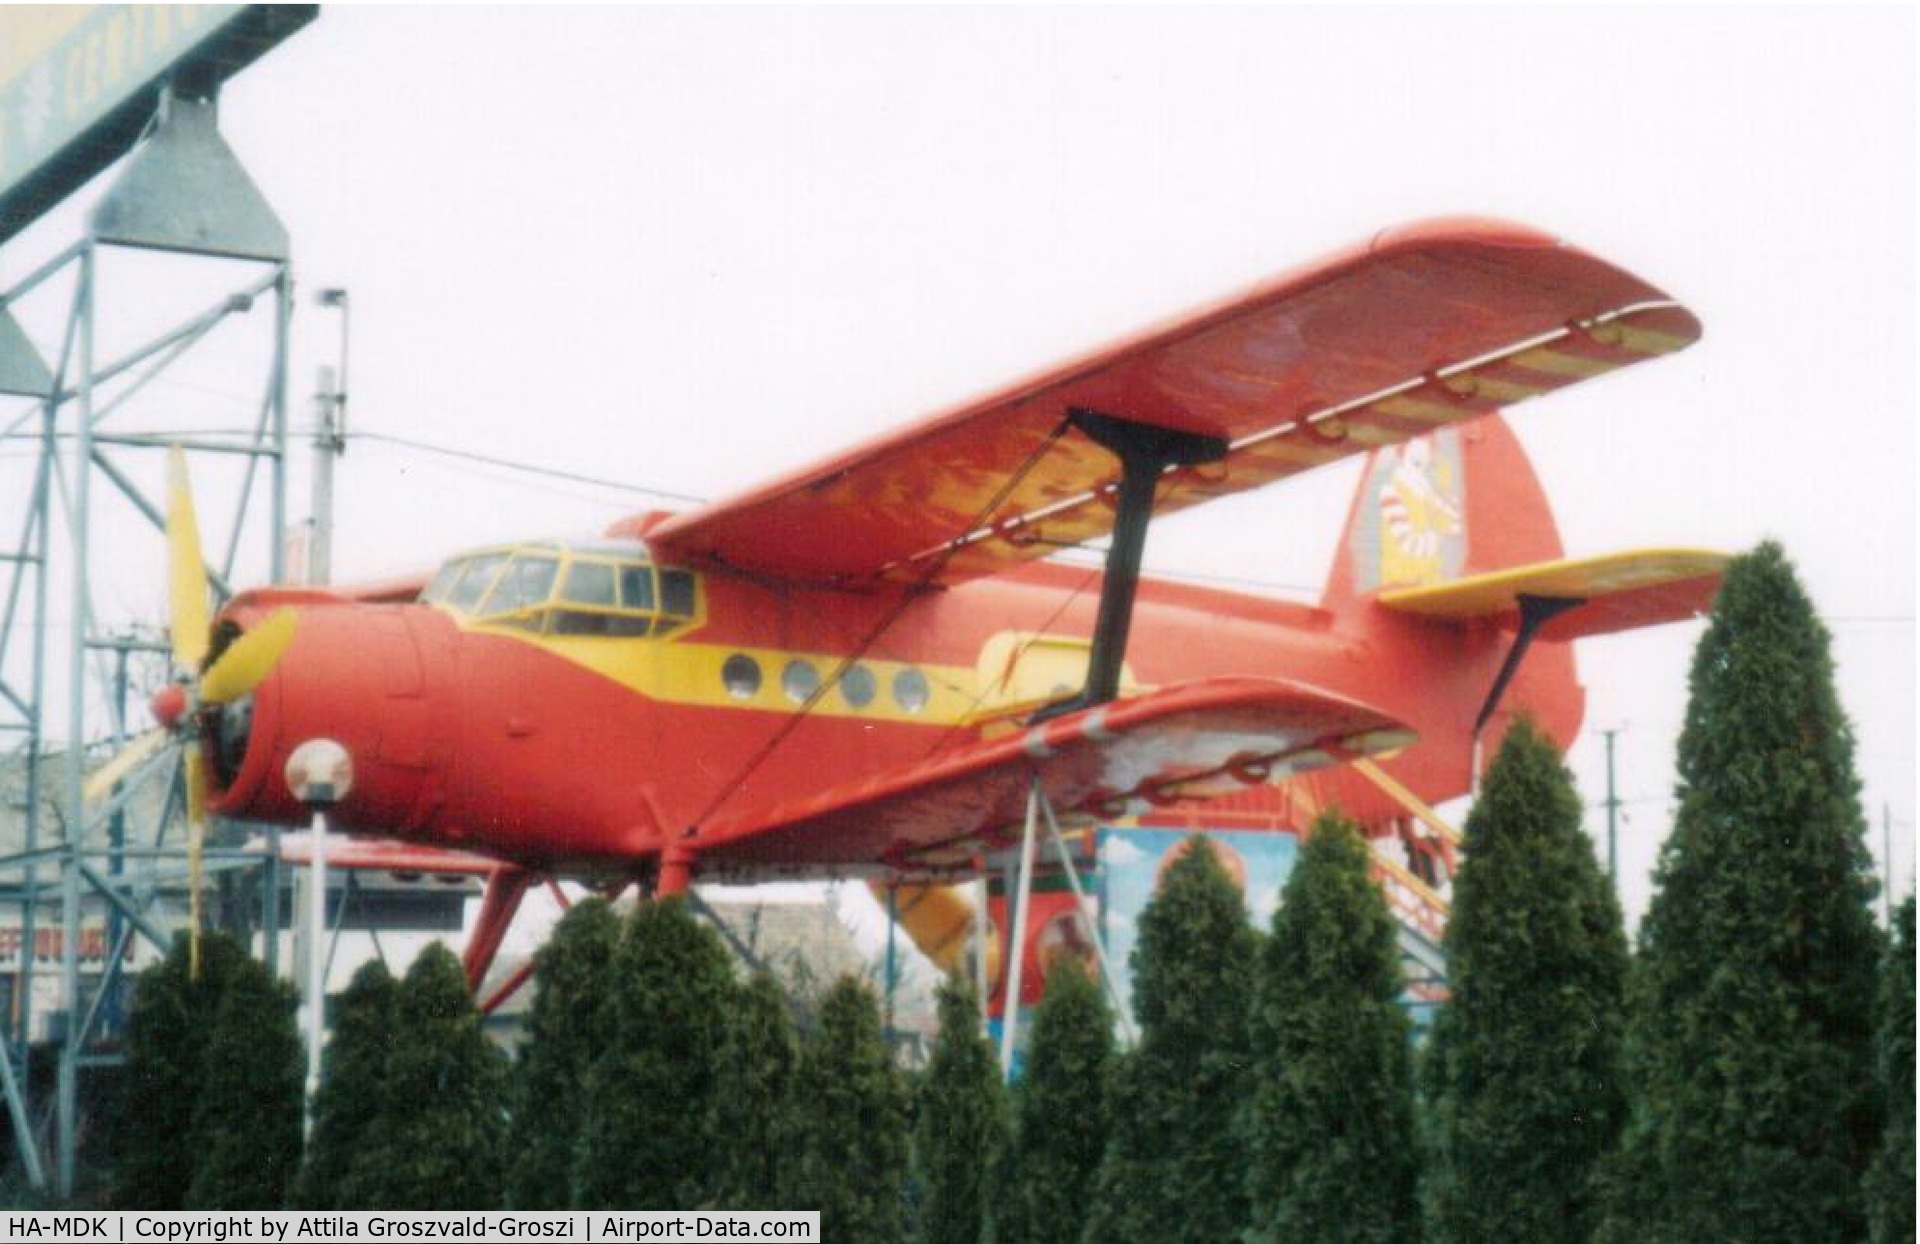 HA-MDK, 1979 PZL-Mielec An-2R C/N 1G181-42, Exhibited after scrapping in the park of a McDonald's restaurant in Budapest.